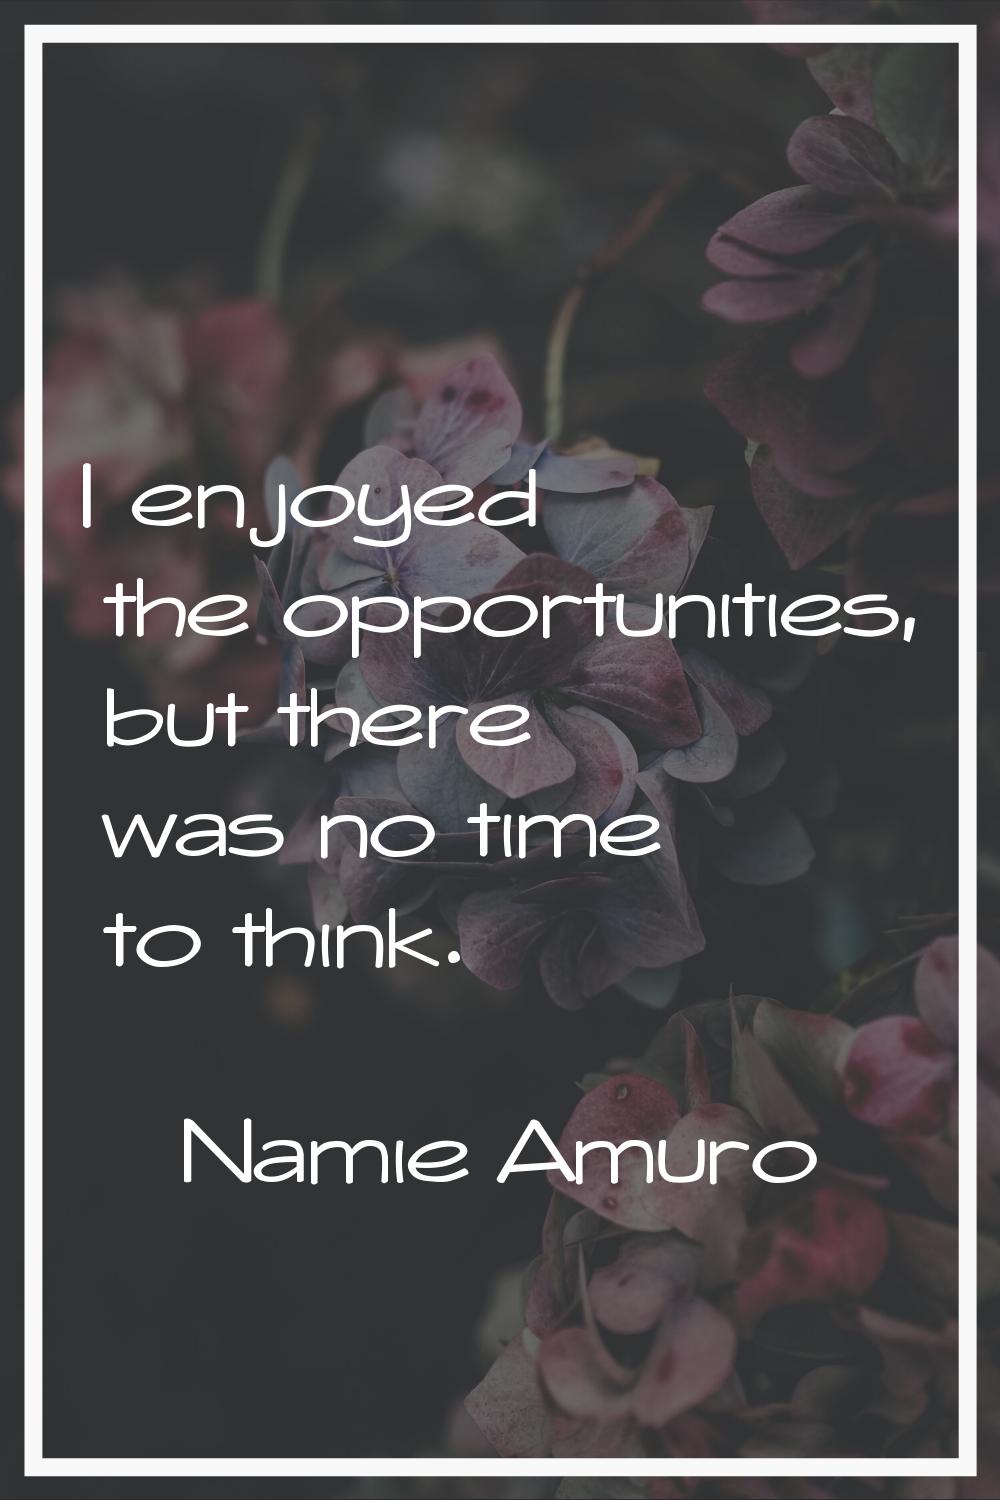 I enjoyed the opportunities, but there was no time to think.